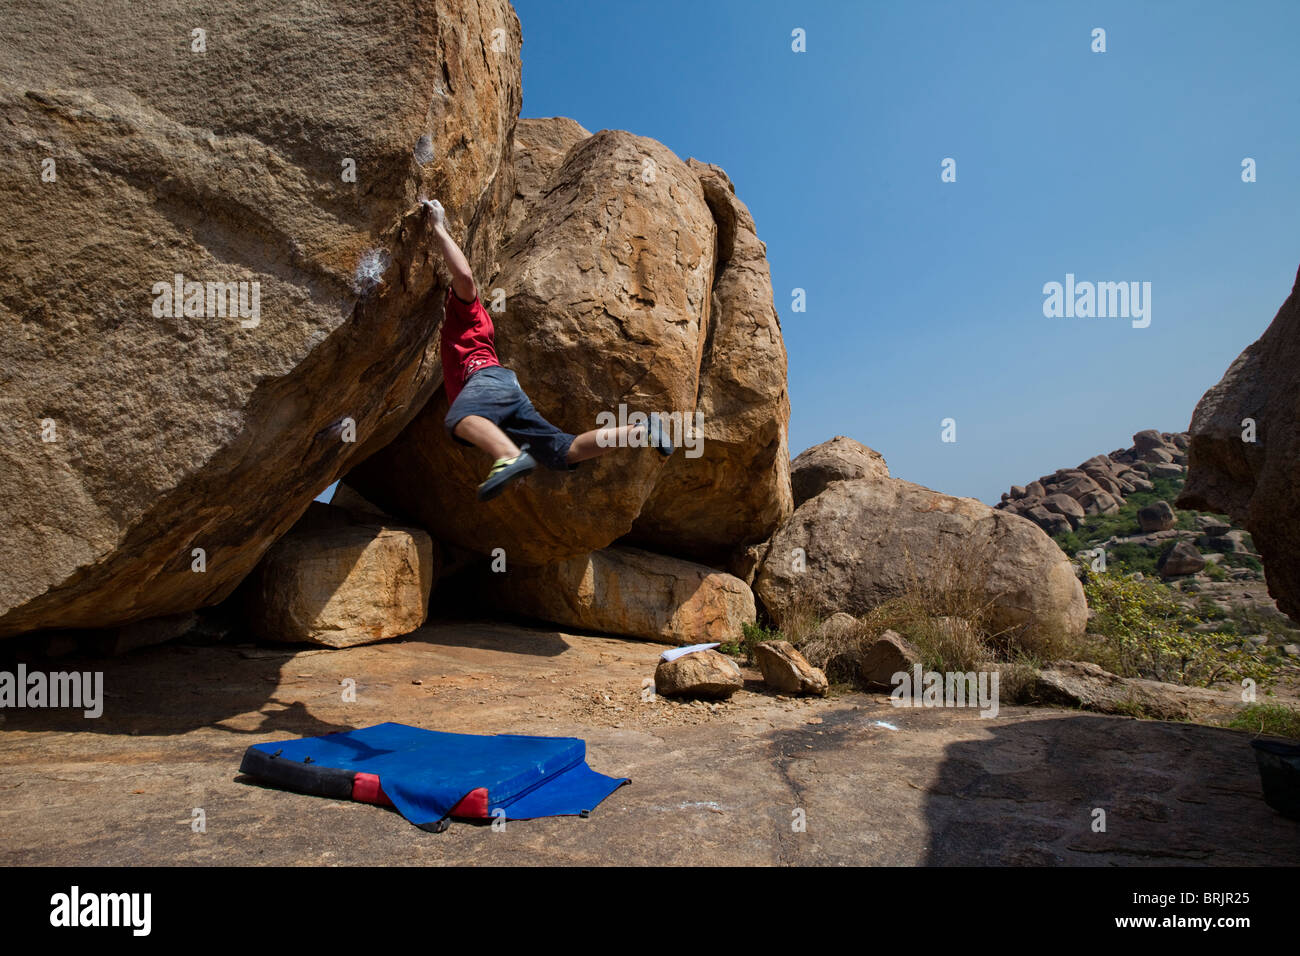 Caucasian male climber cutting loose on a highball boulder in Hampi, India. Stock Photo